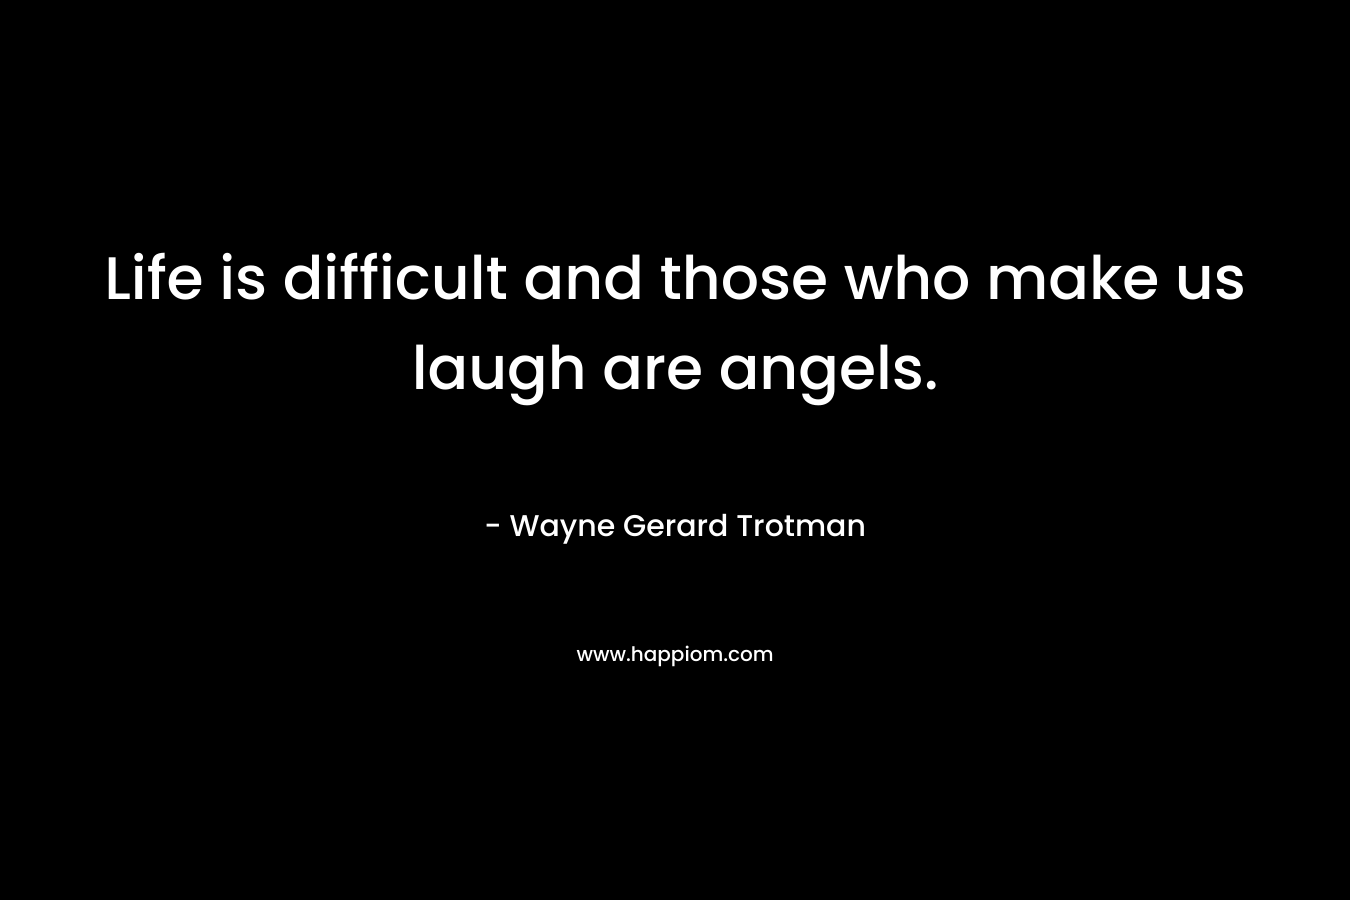 Life is difficult and those who make us laugh are angels.